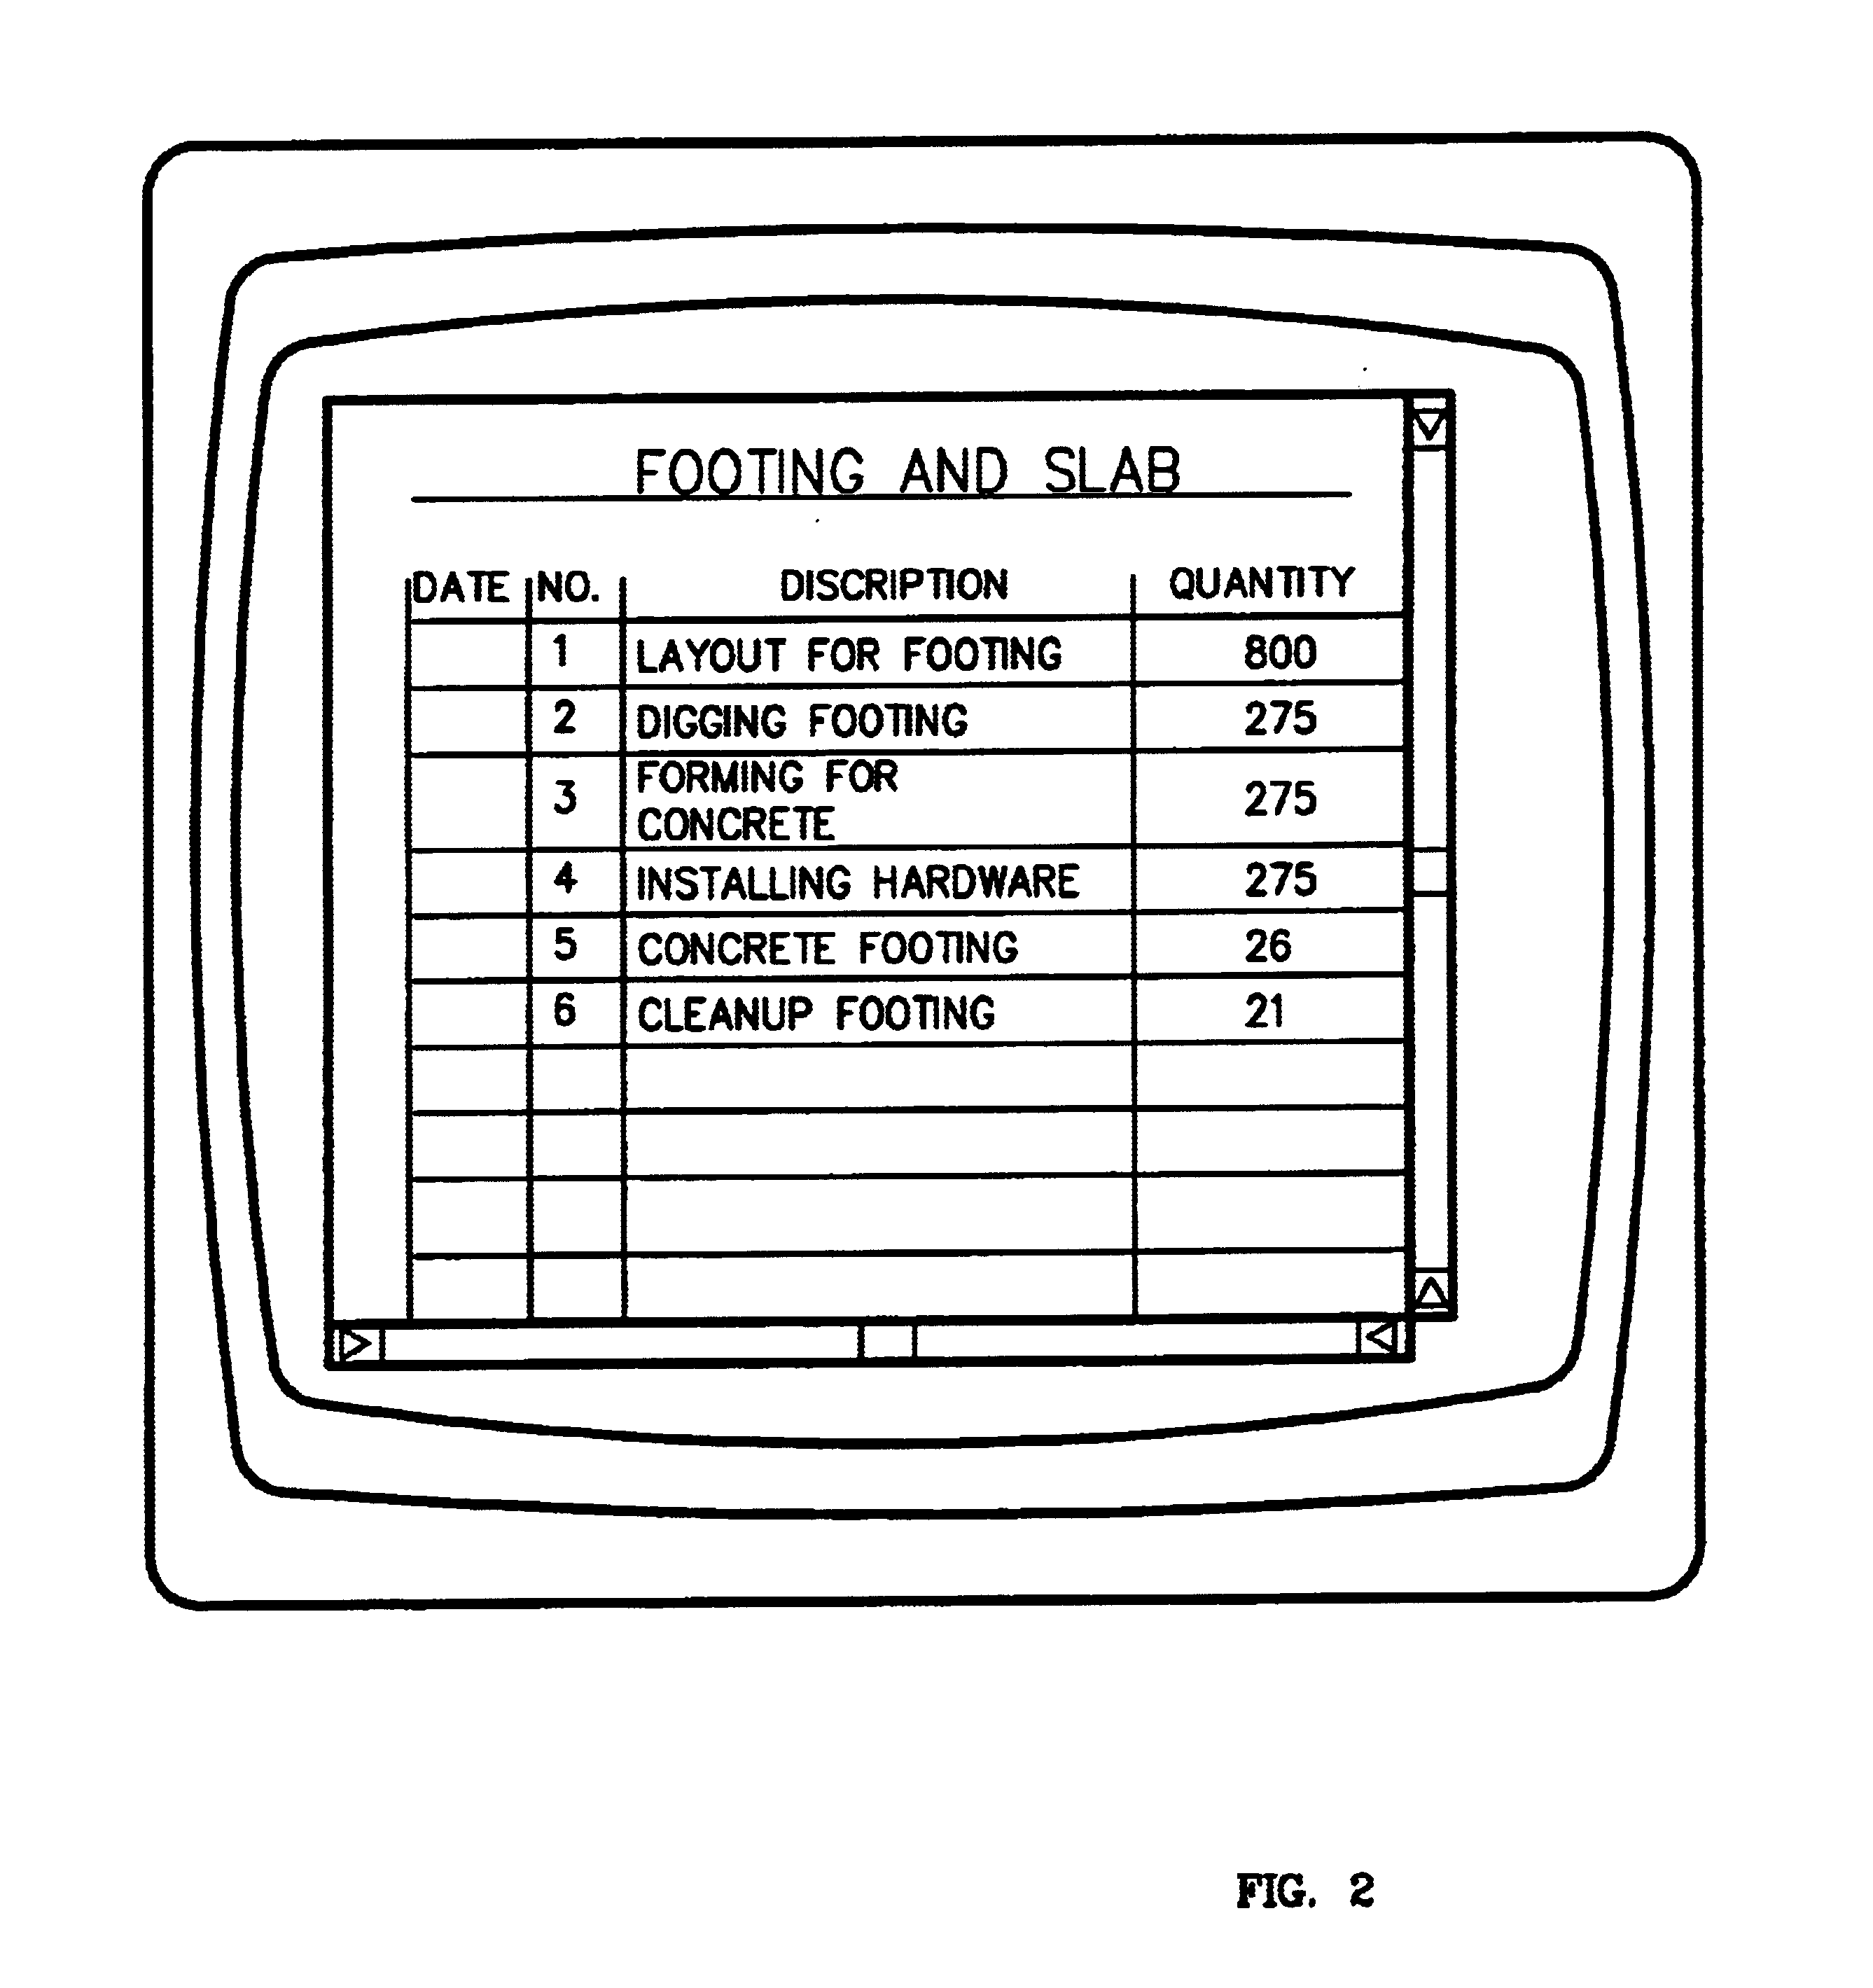 Material and supplies ordering system